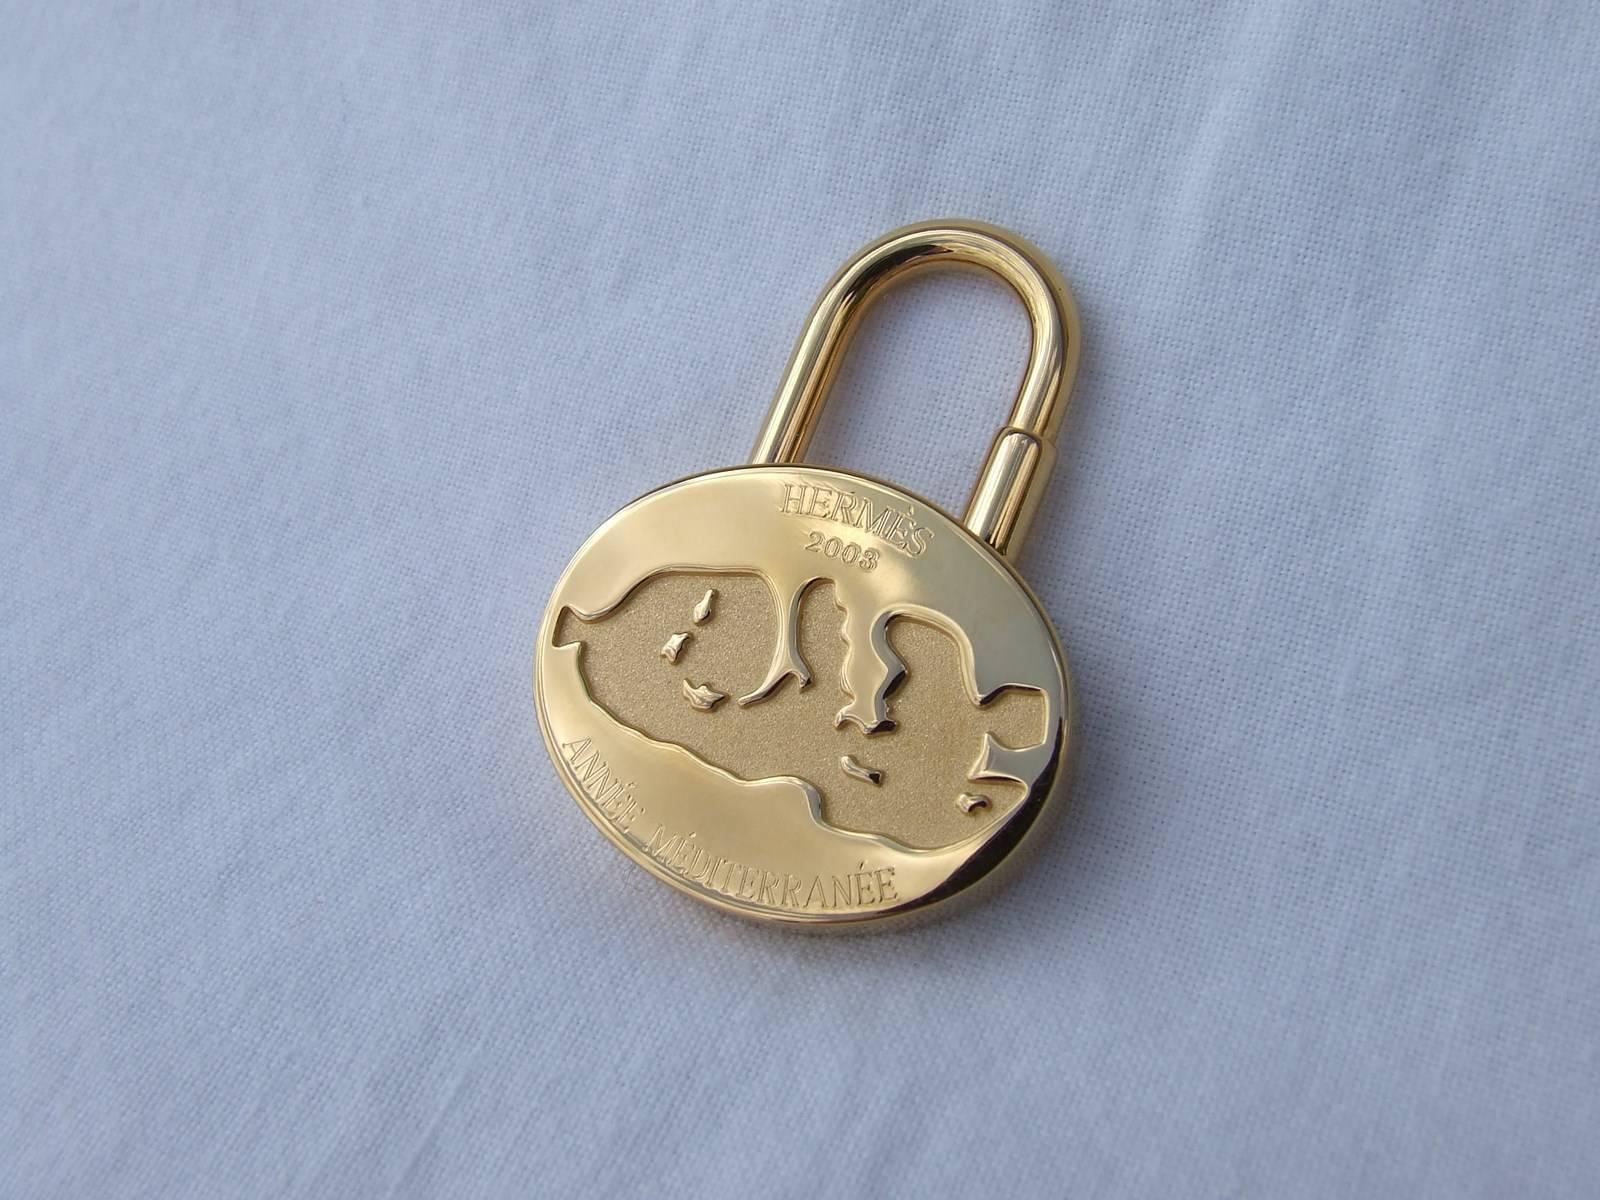 Beautiful Authentic Hermes Padlock or Key Ring

Made in France 

